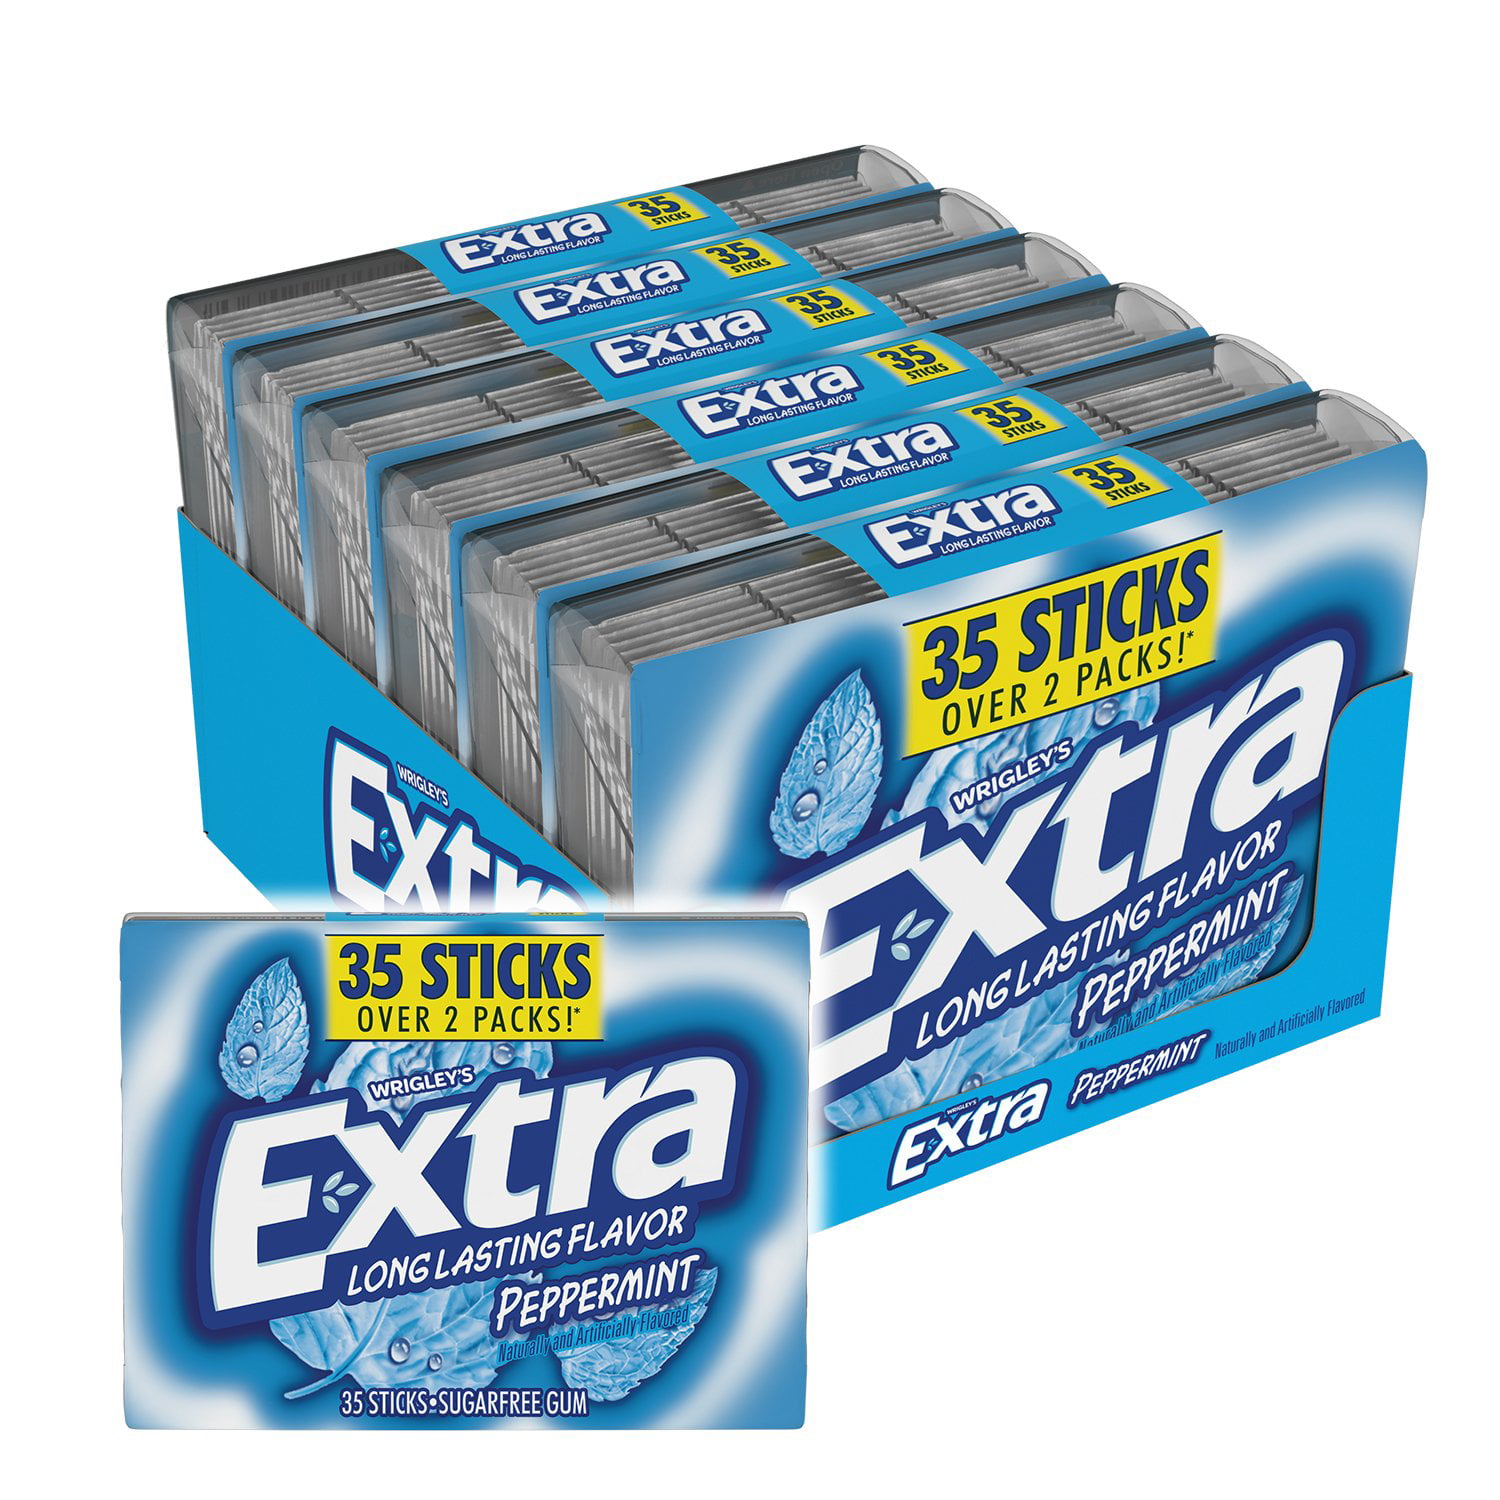 Great Extra Chewing Gum Flavours Access here!